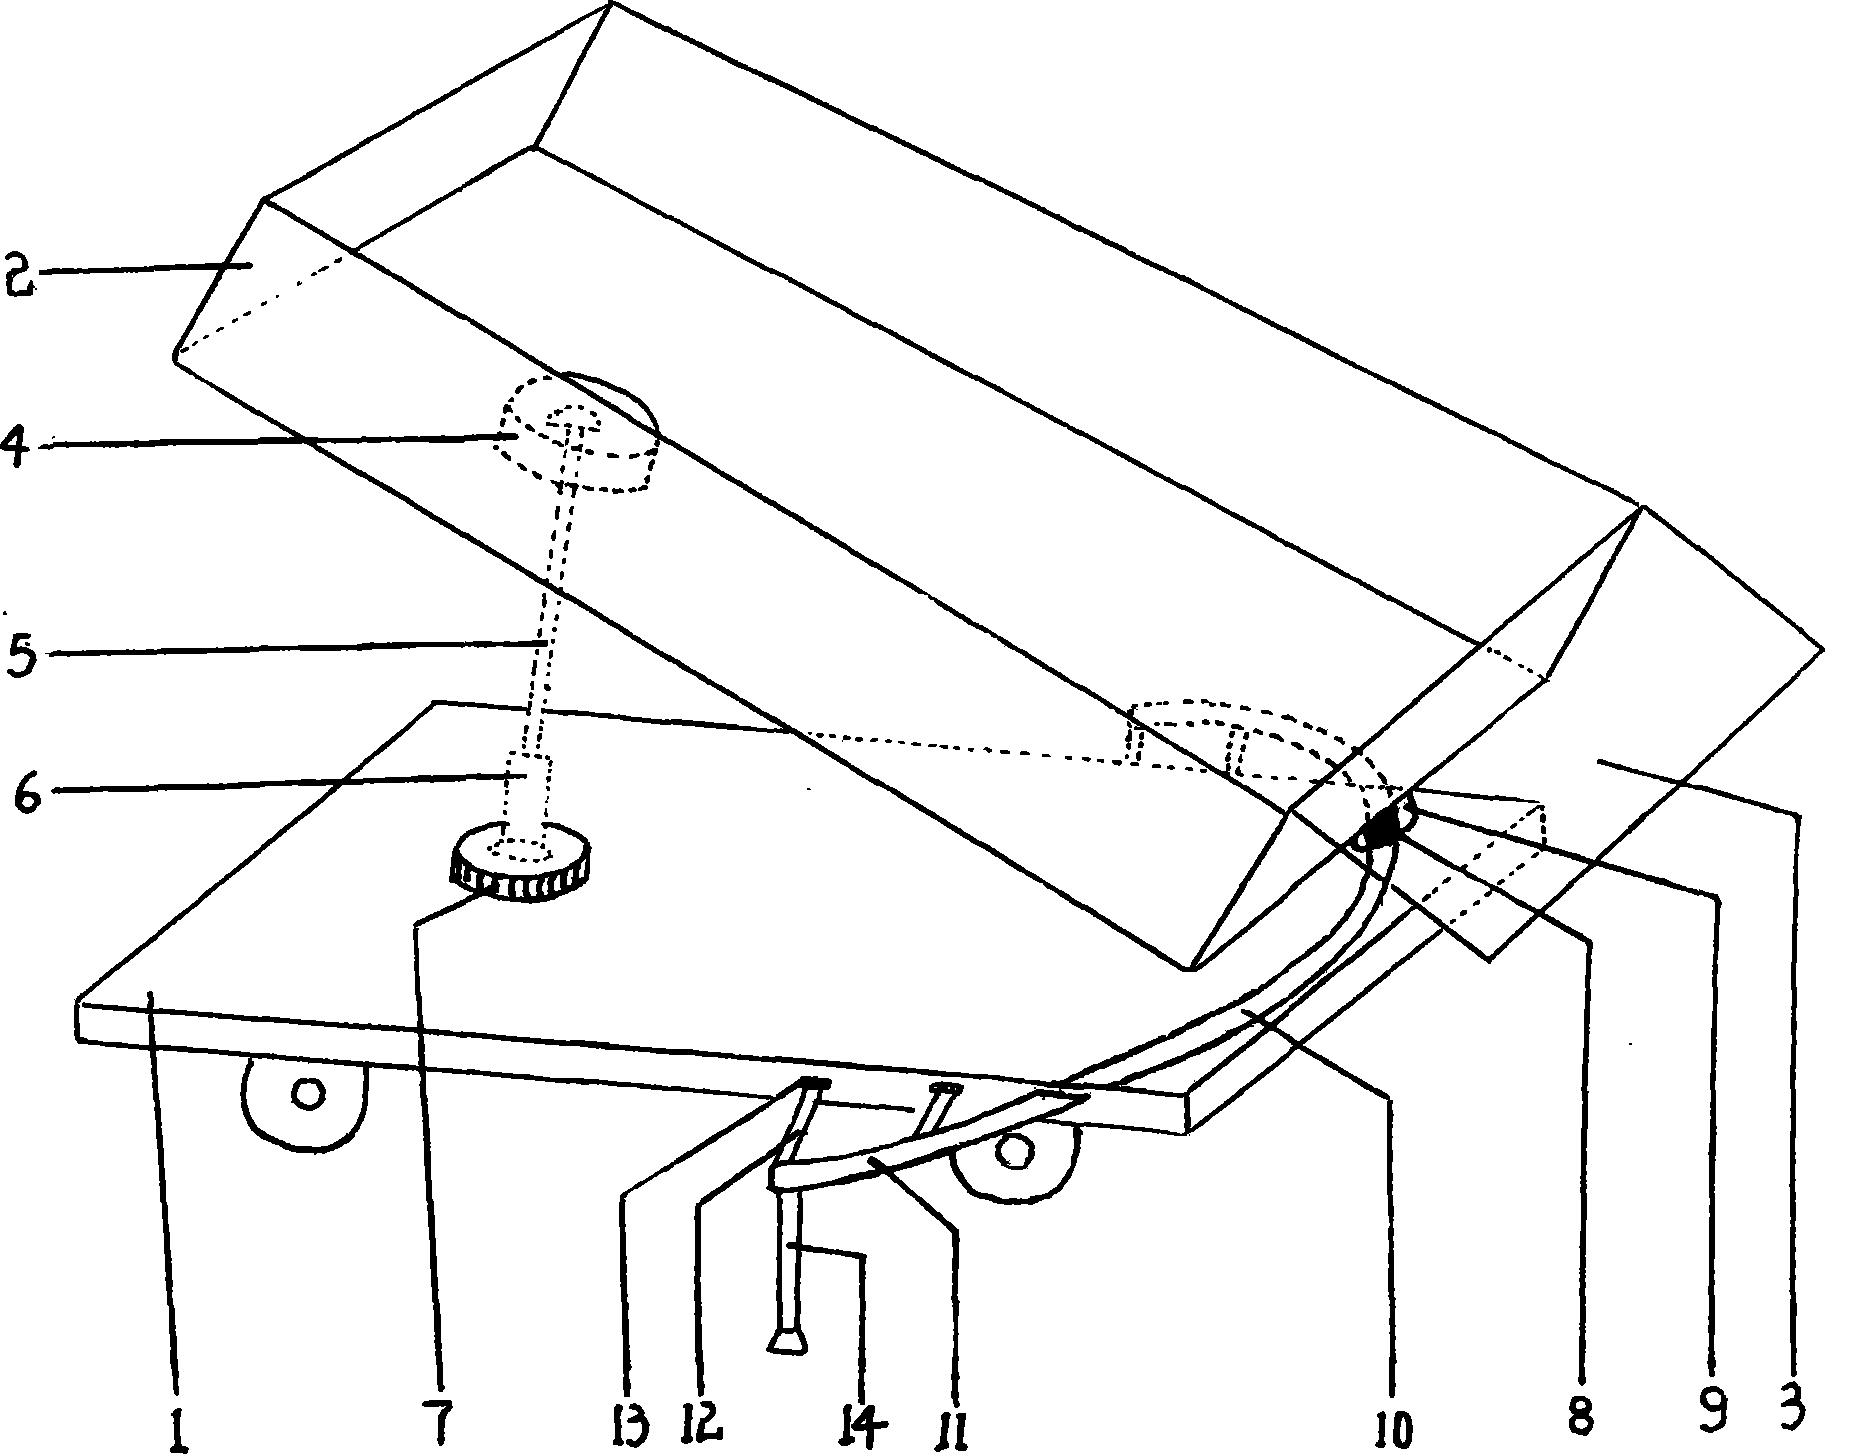 Back-tipping dumper with carriage capable of steering